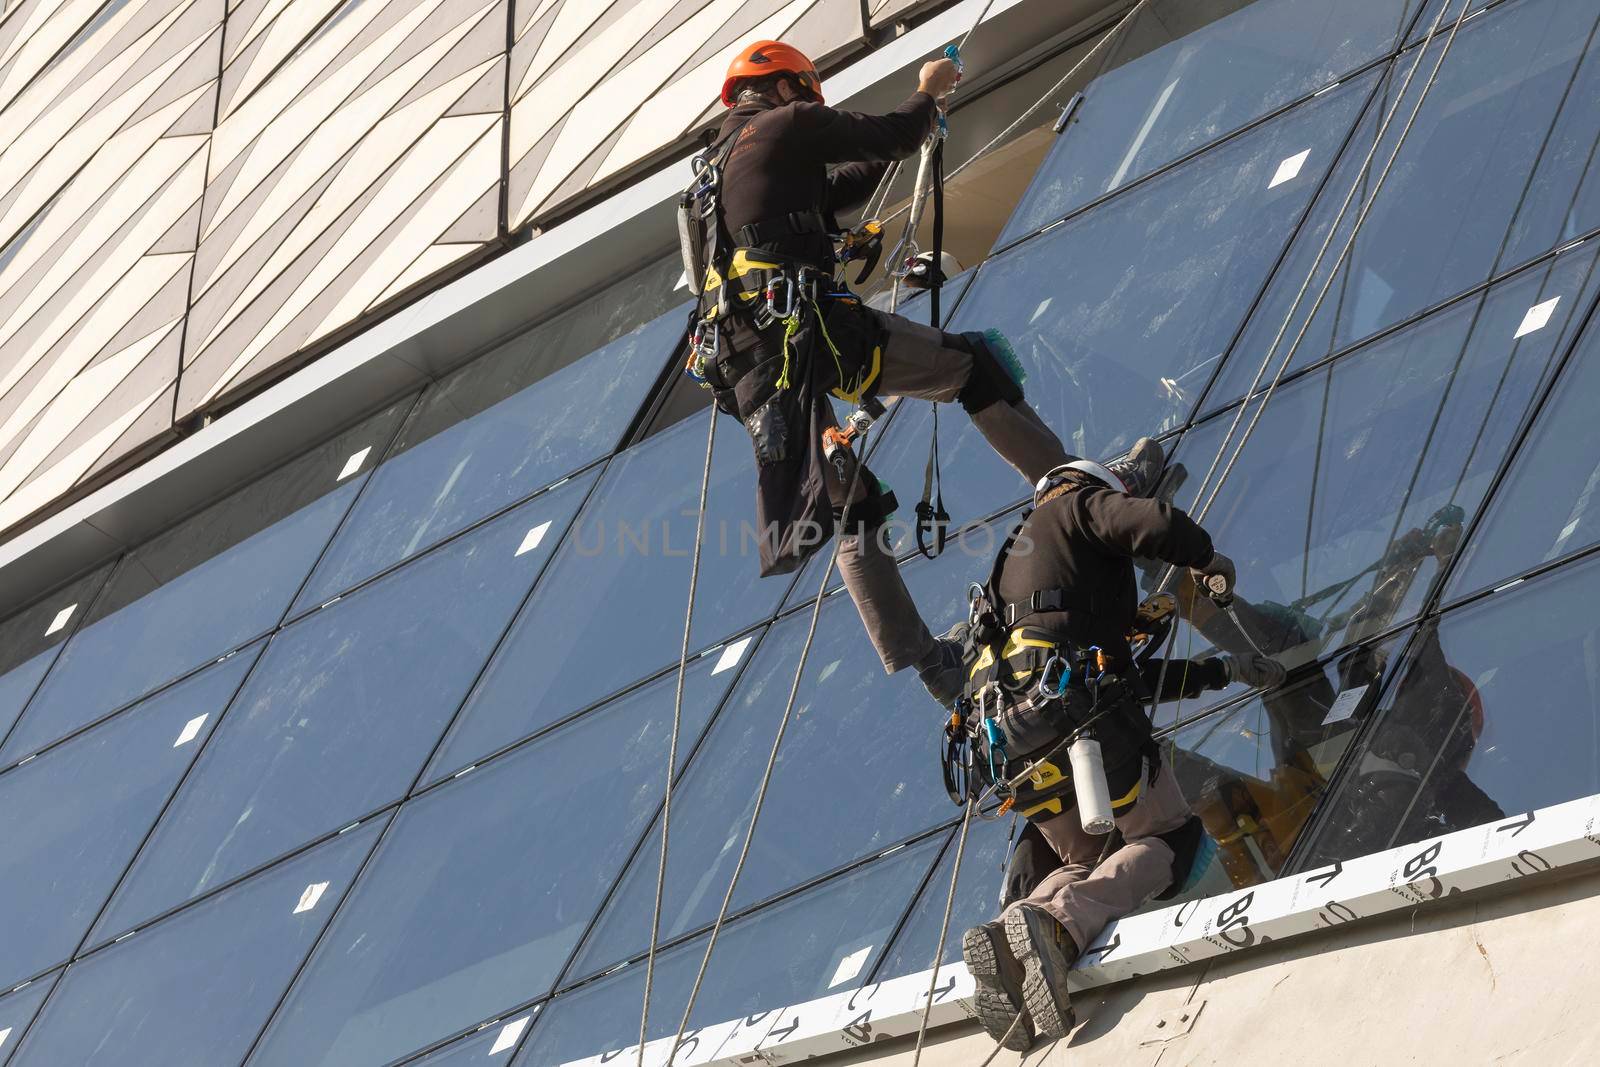 Workers carry out maintenance work, wearing safety harnesses, Spain. by alvarobueno